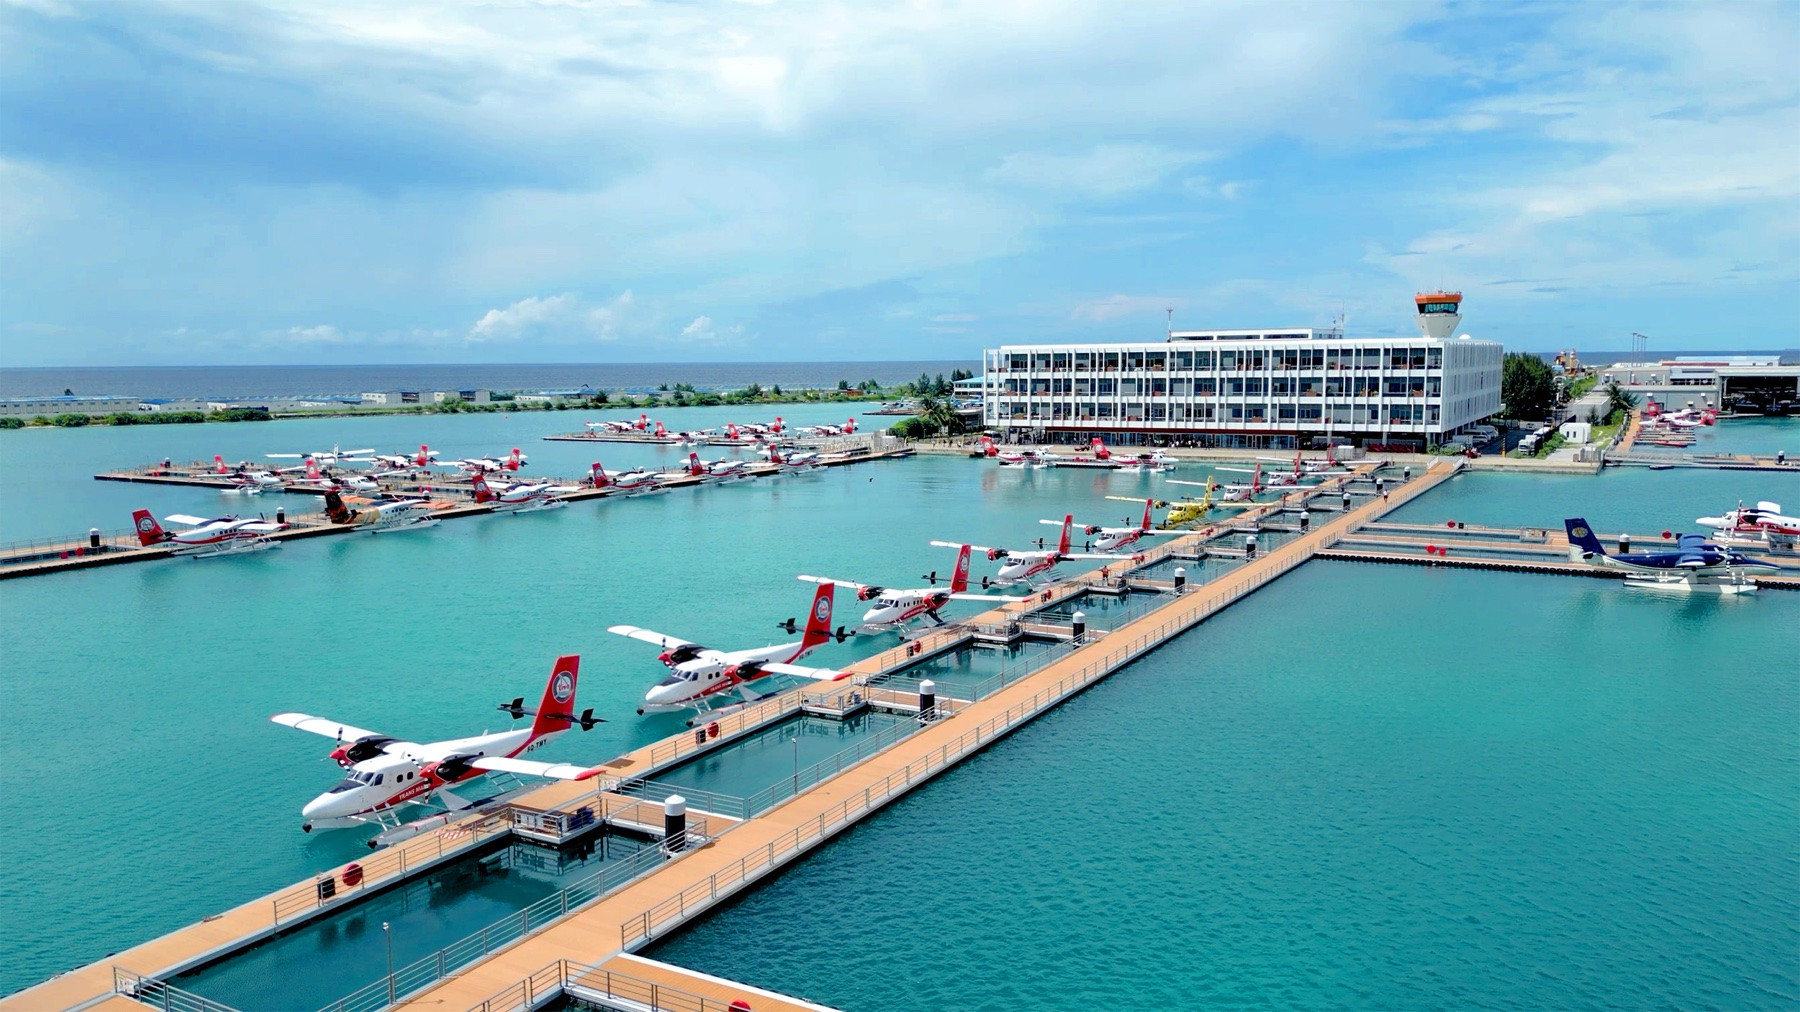 Trans Maldivian Airways Soars to New Heights as World’s Leading Seaplane Operator